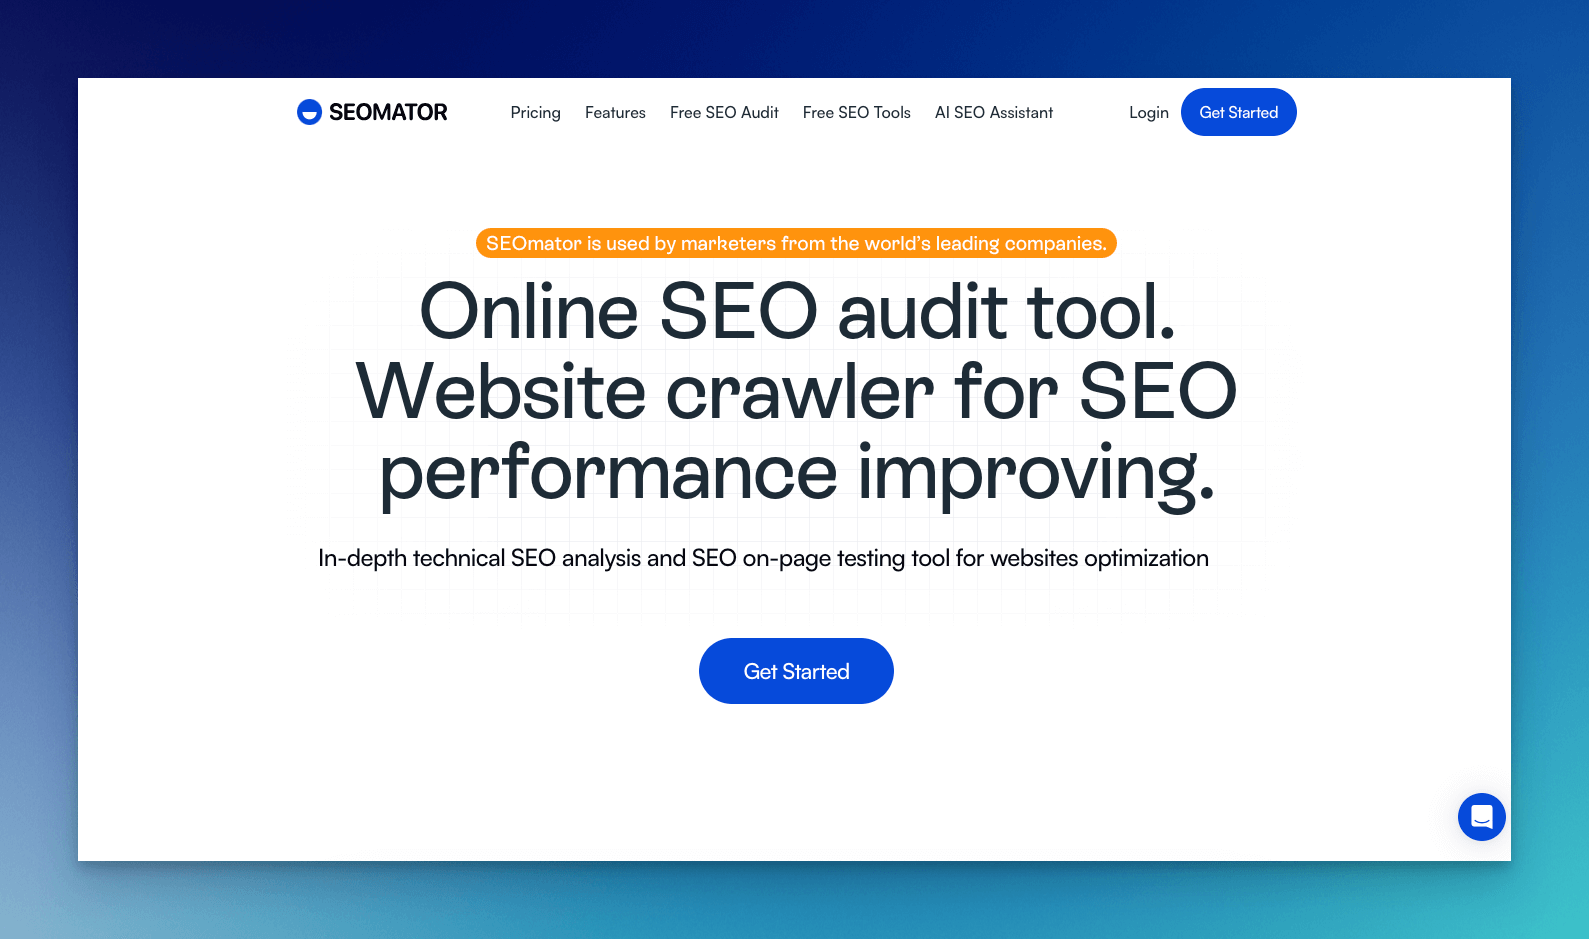 seomator seo crawler tool homepage with a copy that says "Online SEO audit too, website crawler for SEO, performance improving"